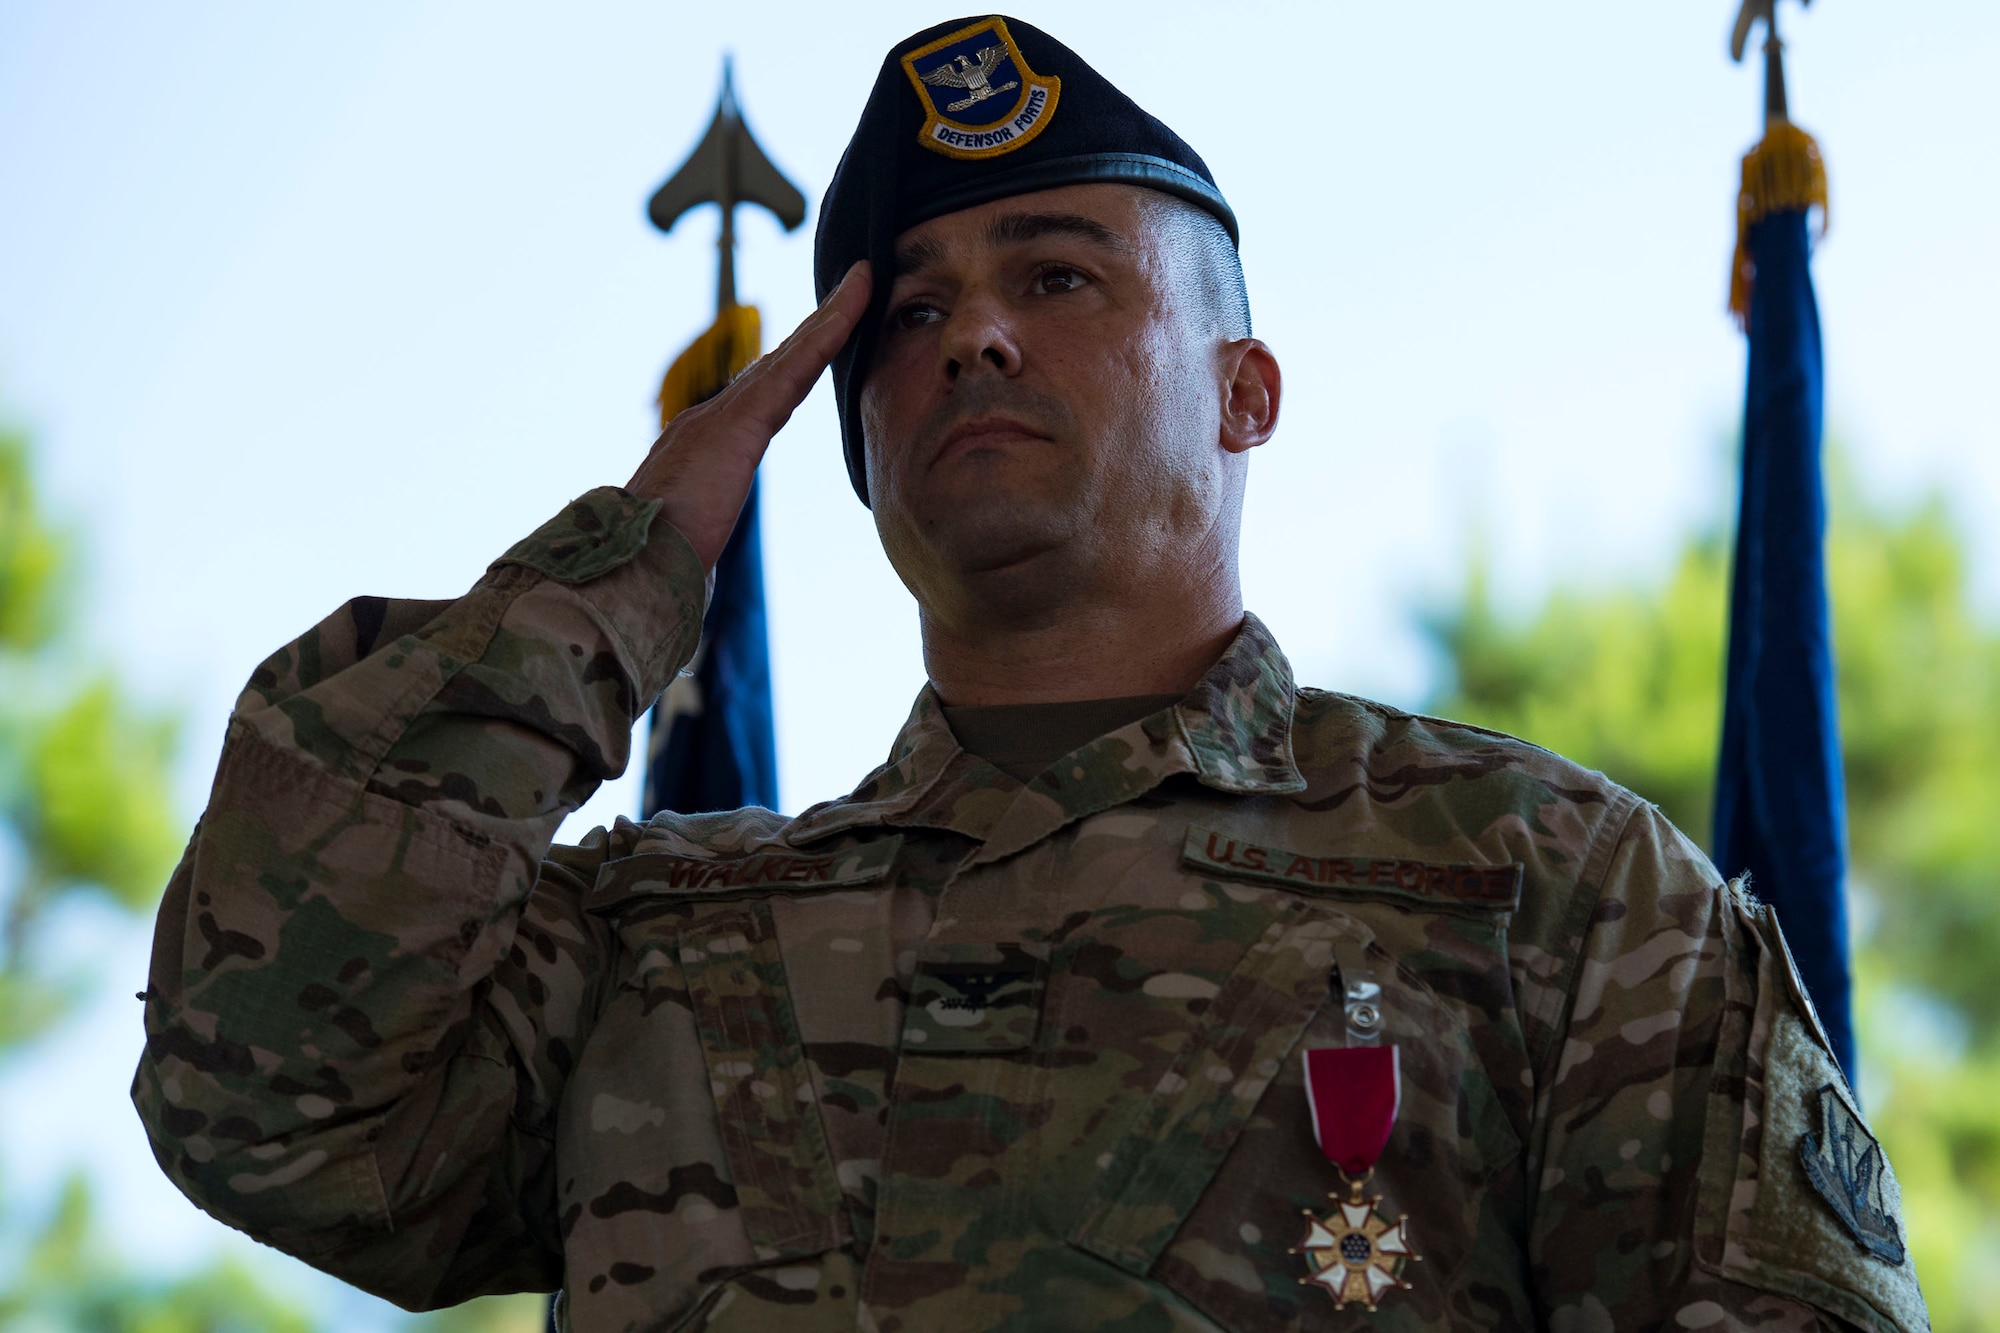 Col. Kevin Walker, 820th Base Defense Group (BDG) outgoing commander, renders his final salute to the 820th BDG during a change of command ceremony, July 12, 2018, at Moody Air Force Base, Ga. Col. Benito Barron, 820th BDG commander, who recently relinquished his duties as the Chief of the Homeland Defense and Protection Division for Headquarters United States Northern Command, will now command the 820th BDG. The ceremony represents the formal passing of responsibility, authority and accountability of command from one officer to another. The 820th BDG is the Air Force’s only unit specifically designed to provide fully integrated defense operations. (U.S. Air Force photo by Airman 1st Class Erick Requadt)